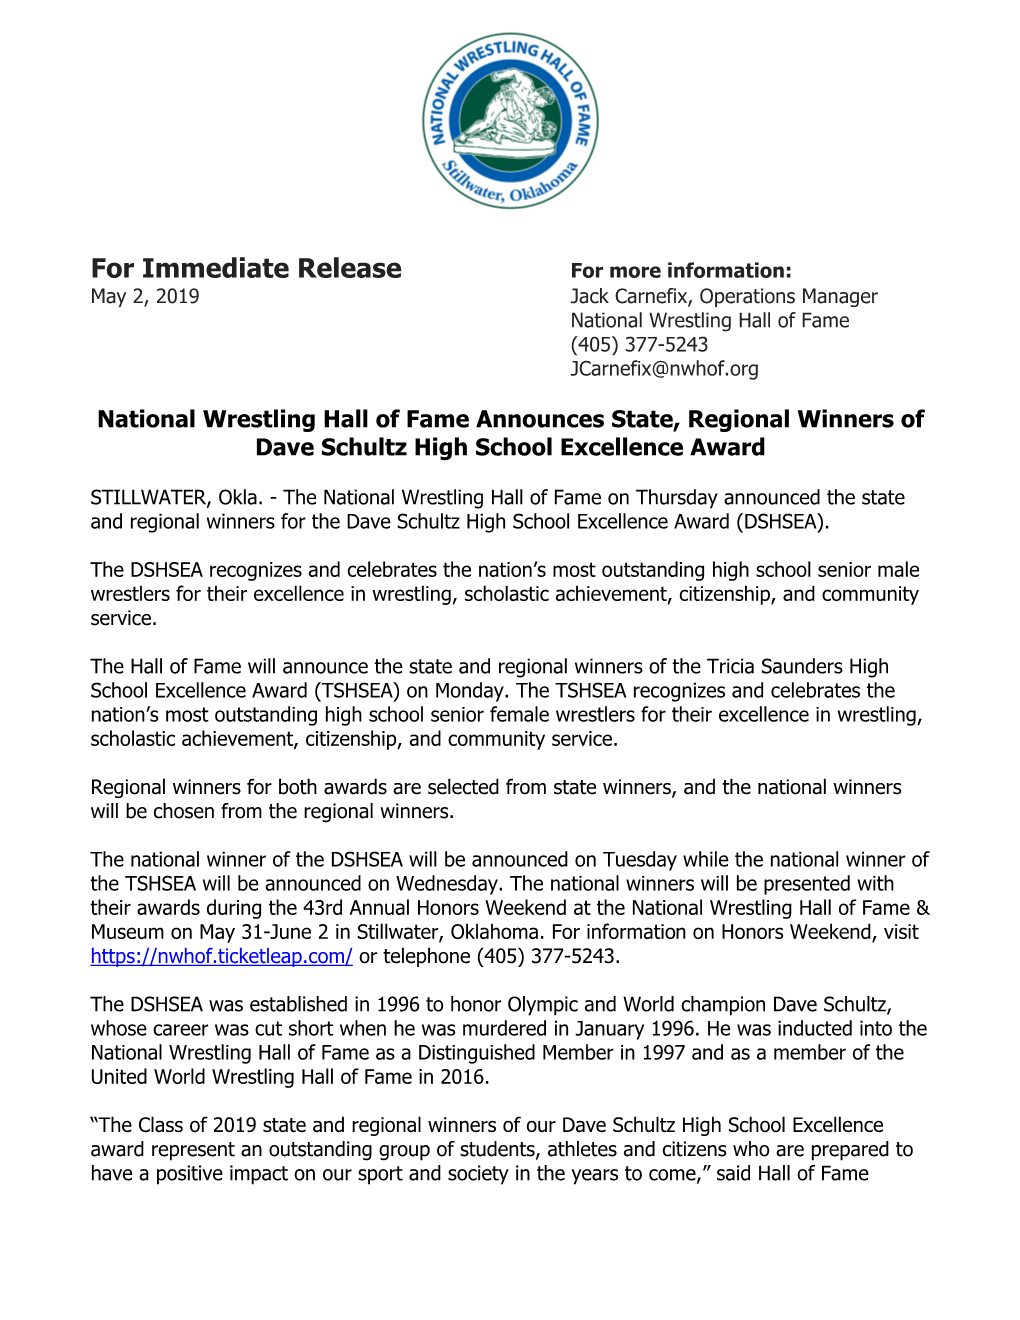 For Immediate Release for More Information: May 2, 2019 Jack Carnefix, Operations Manager National Wrestling Hall of Fame (405) 377-5243 Jcarnefix@Nwhof.Org